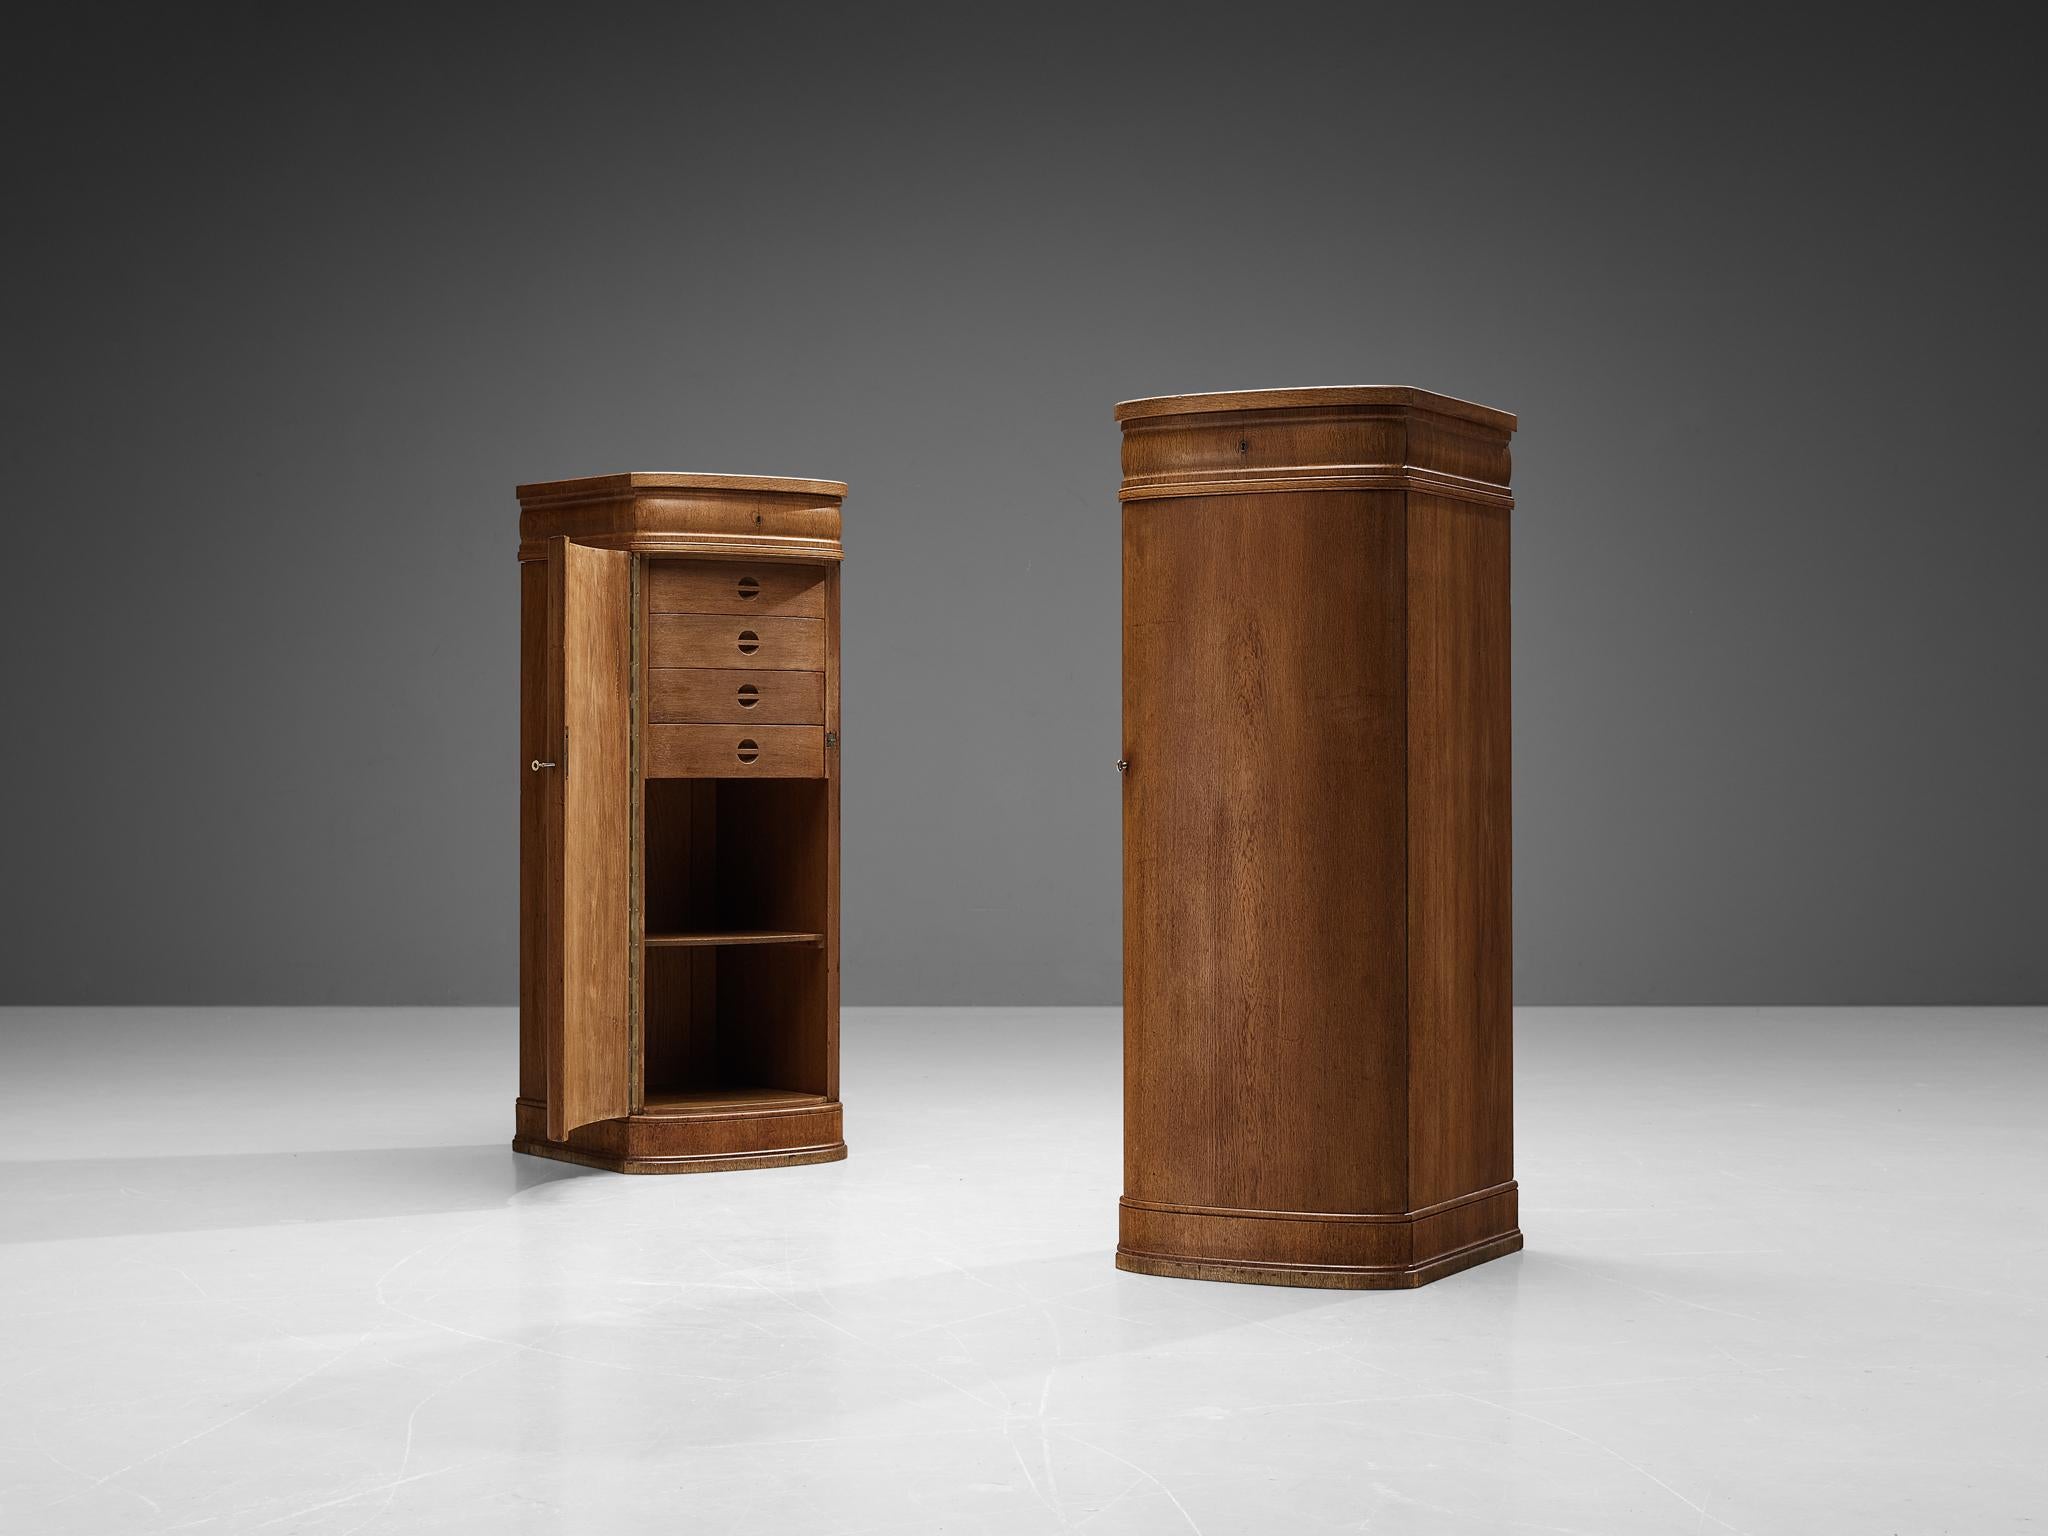 Pair of cabinets, oak, brass, felt, Denmark, 1940s. 

This refined pair of chiffonier cabinets are certainly made by a cabinetmaker who understood how to design a high quality piece of furniture. Excellent craftsmanship is combined with a